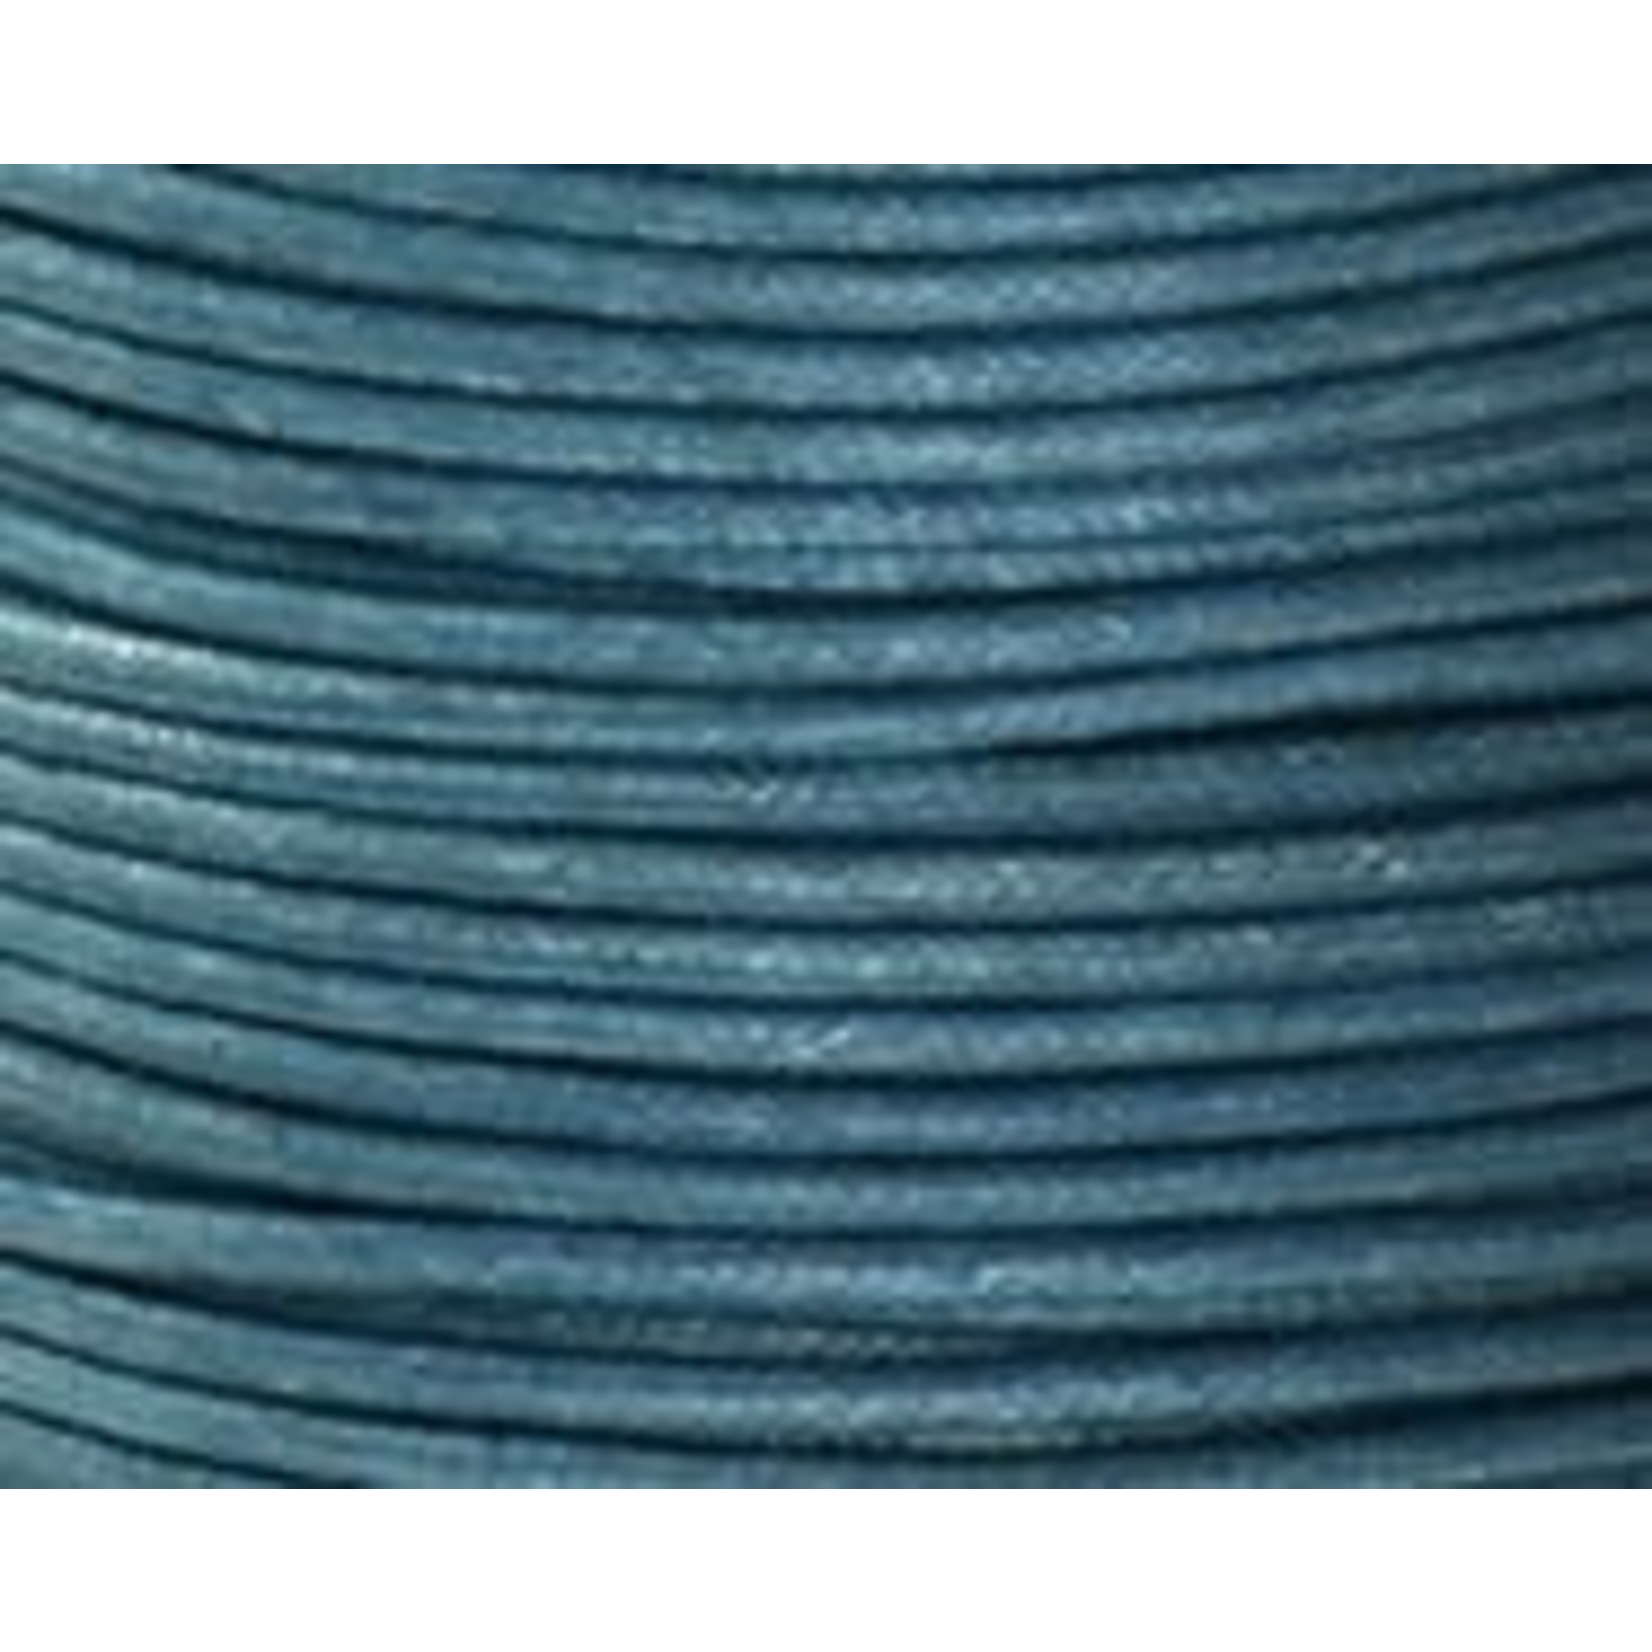 Blue Waxed Cotton Cord 2mm - 1 ft